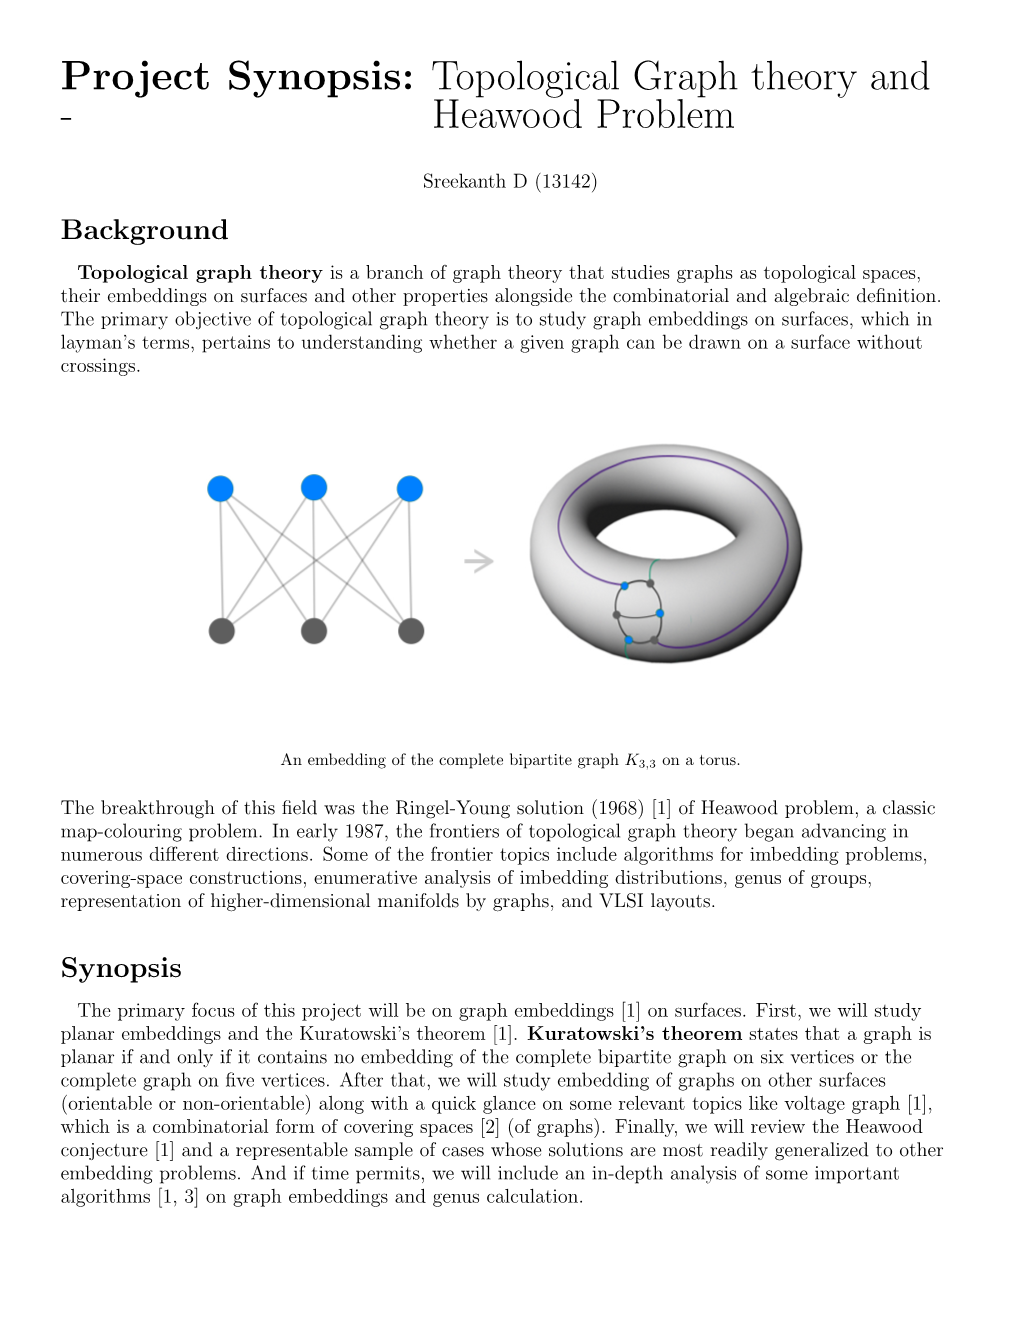 Project Synopsis: Topological Graph Theory and - Heawood Problem